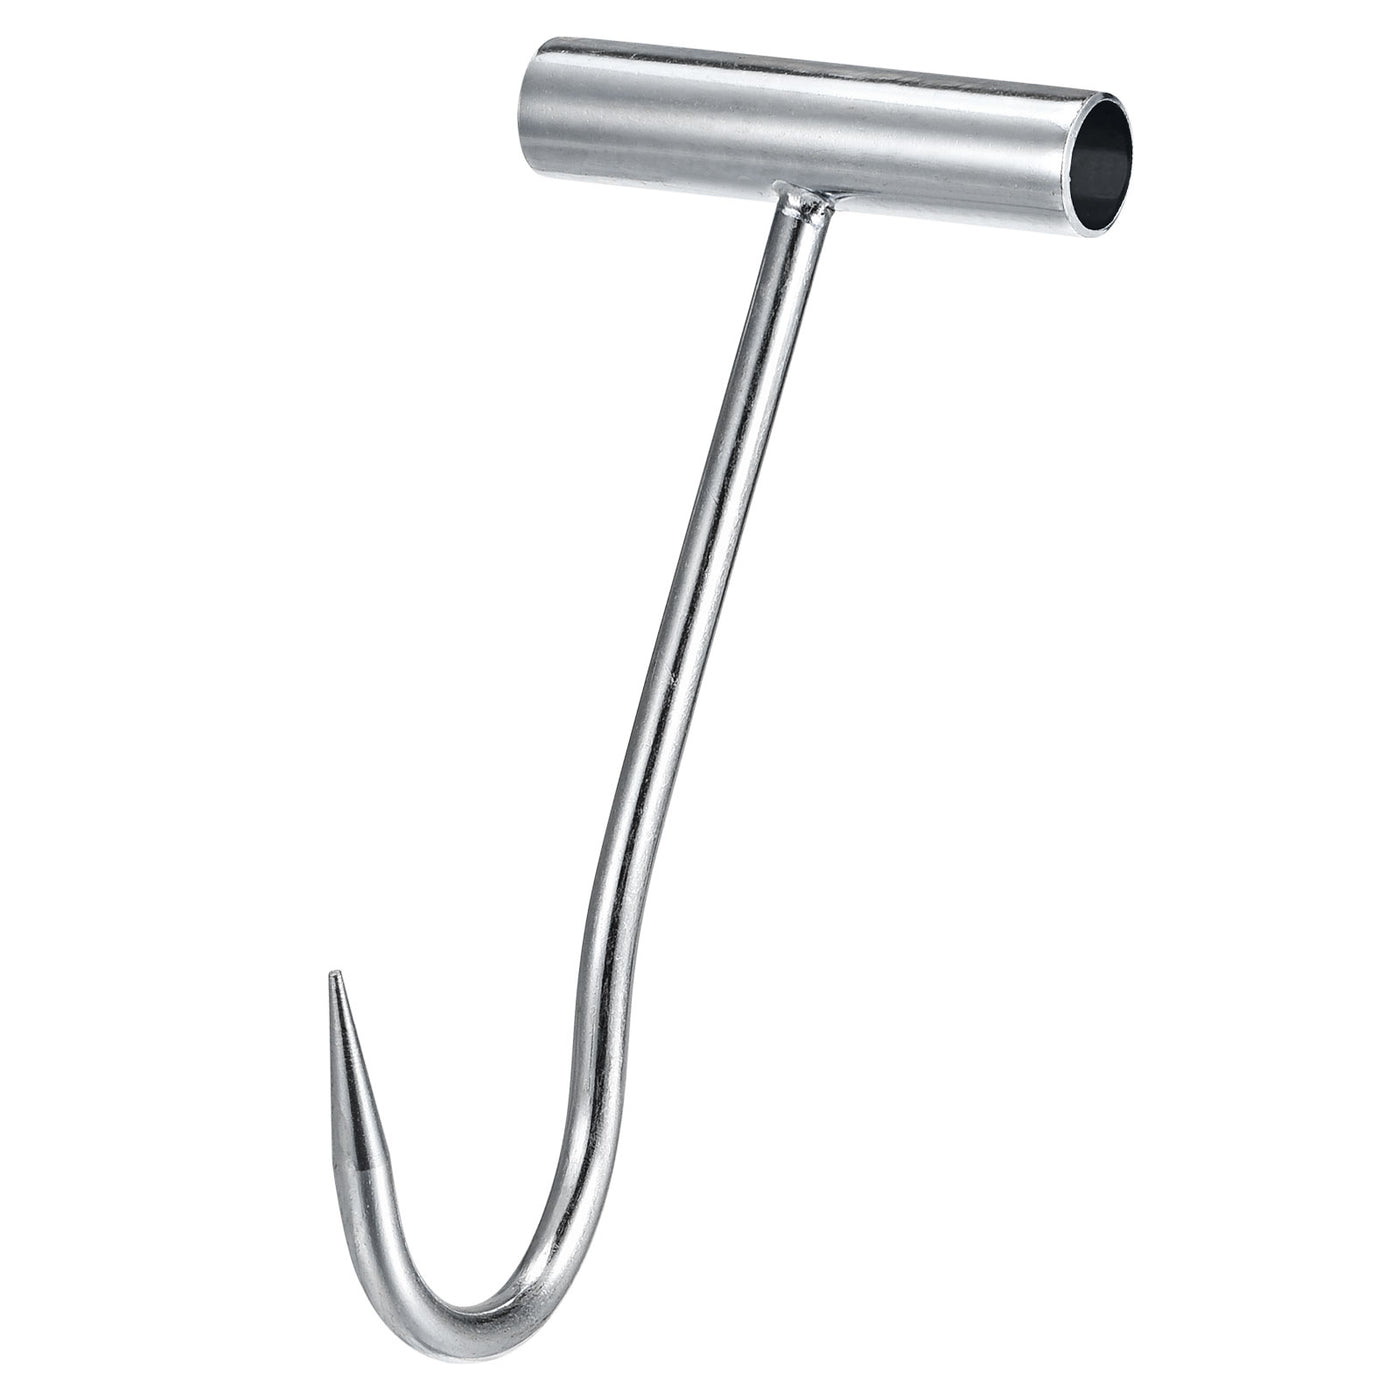 Wholesale meat hooks for butchering For Hardware And Tools Needs